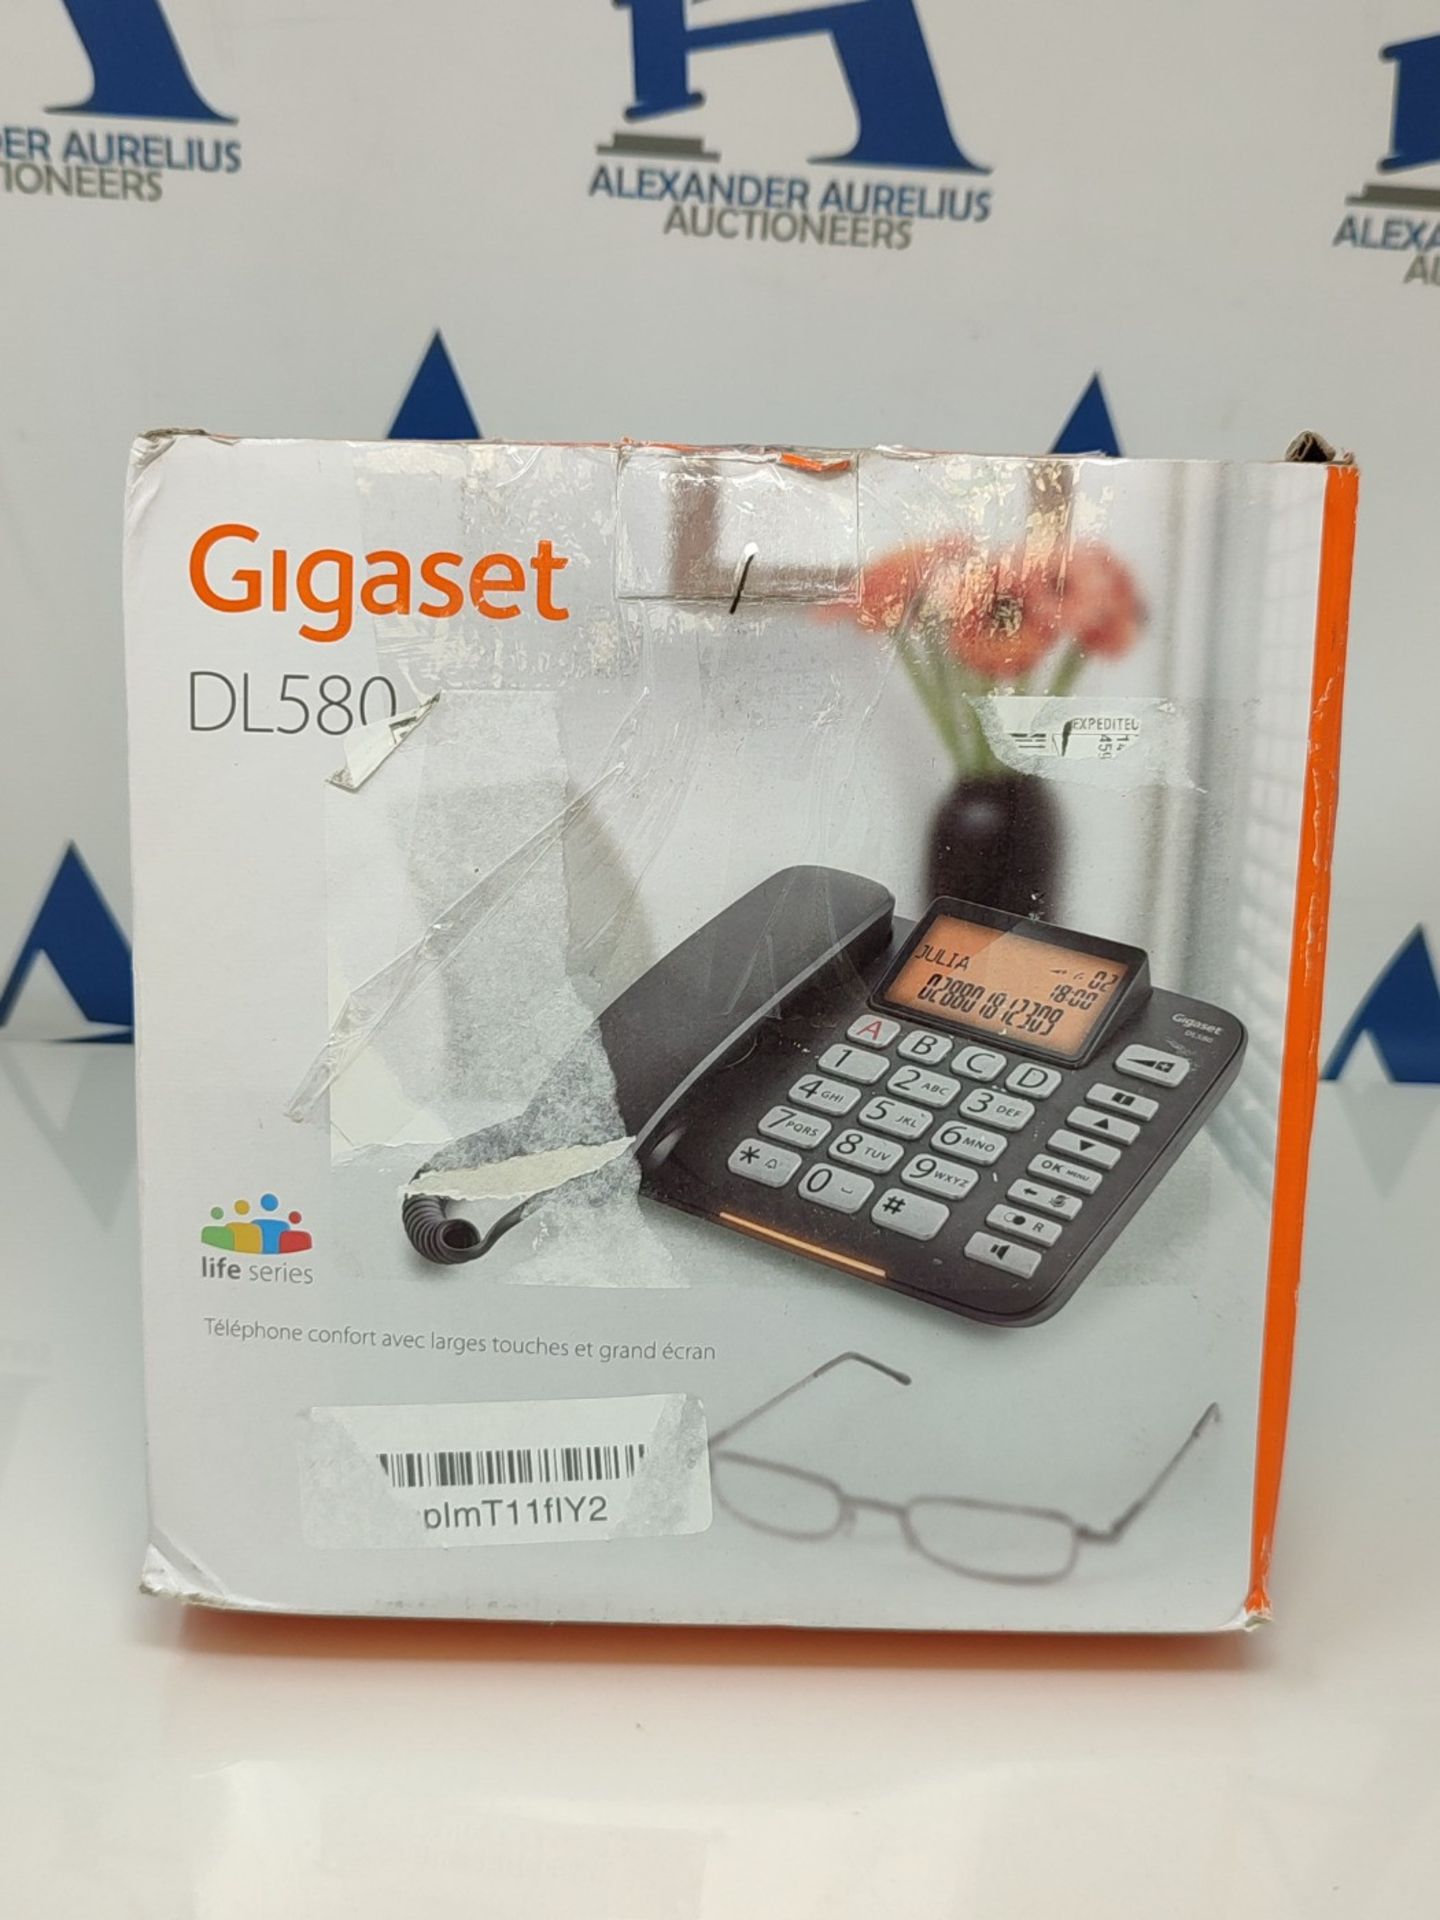 Gigaset DL580 Corded Telephone Black [French Version] - Image 3 of 3